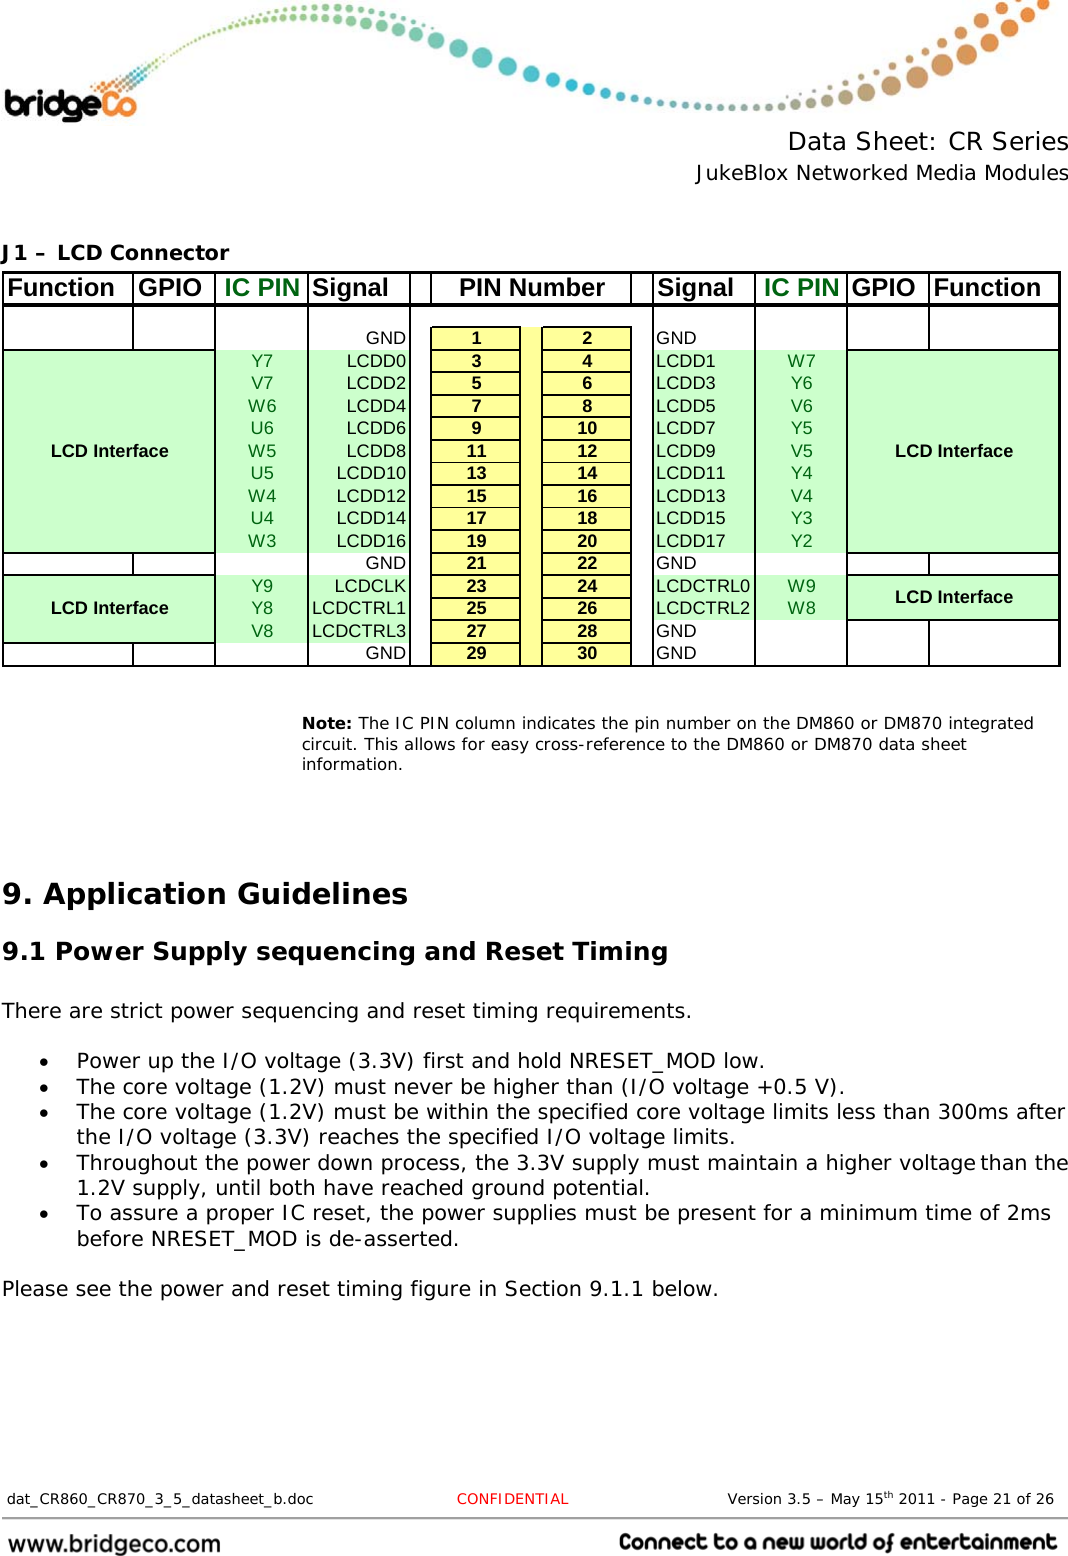  Data Sheet: CR Series JukeBlox Networked Media Modules  dat_CR860_CR870_3_5_datasheet_b.doc   CONFIDENTIAL                               Version 3.5 – May 15th 2011 - Page 21 of 26                                  J1 – LCD Connector Function GPIO IC PIN Signal Signal IC PIN GPIO FunctionGND 12GNDY7 LCDD0 34LCDD1 W7V7 LCDD2 56LCDD3 Y6W6 LCDD4 78LCDD5 V6U6 LCDD6 910LCDD7 Y5W5 LCDD8 11 12 LCDD9 V5U5 LCDD10 13 14 LCDD11 Y4W4 LCDD12 15 16 LCDD13 V4U4 LCDD14 17 18 LCDD15 Y3W3 LCDD16 19 20 LCDD17 Y2GND 21 22 GNDY9 LCDCLK 23 24 LCDCTRL0 W9Y8 LCDCTRL1 25 26 LCDCTRL2 W8V8 LCDCTRL3 27 28 GNDGND 29 30 GNDPIN NumberLCD InterfaceLCD InterfaceLCD InterfaceLCD Interface   Note: The IC PIN column indicates the pin number on the DM860 or DM870 integrated circuit. This allows for easy cross-reference to the DM860 or DM870 data sheet information.    9. Application Guidelines 9.1 Power Supply sequencing and Reset Timing  There are strict power sequencing and reset timing requirements.   Power up the I/O voltage (3.3V) first and hold NRESET_MOD low. The core voltage (1.2V) must never be higher than (I/O voltage +0.5 V). The core voltage (1.2V) must be within the specified core voltage limits less than 300ms afterthe I/O voltage (3.3V) reaches the specified I/O voltage limits. Throughout the power down process, the 3.3V supply must maintain a higher voltagethan the 1.2V supply, until both have reached ground potential. To assure a proper IC reset, the power supplies must be present for a minimum time of 2msbefore NRESET_MOD is de-asserted. Please see the power and reset timing figure in Section 9.1.1 below. 